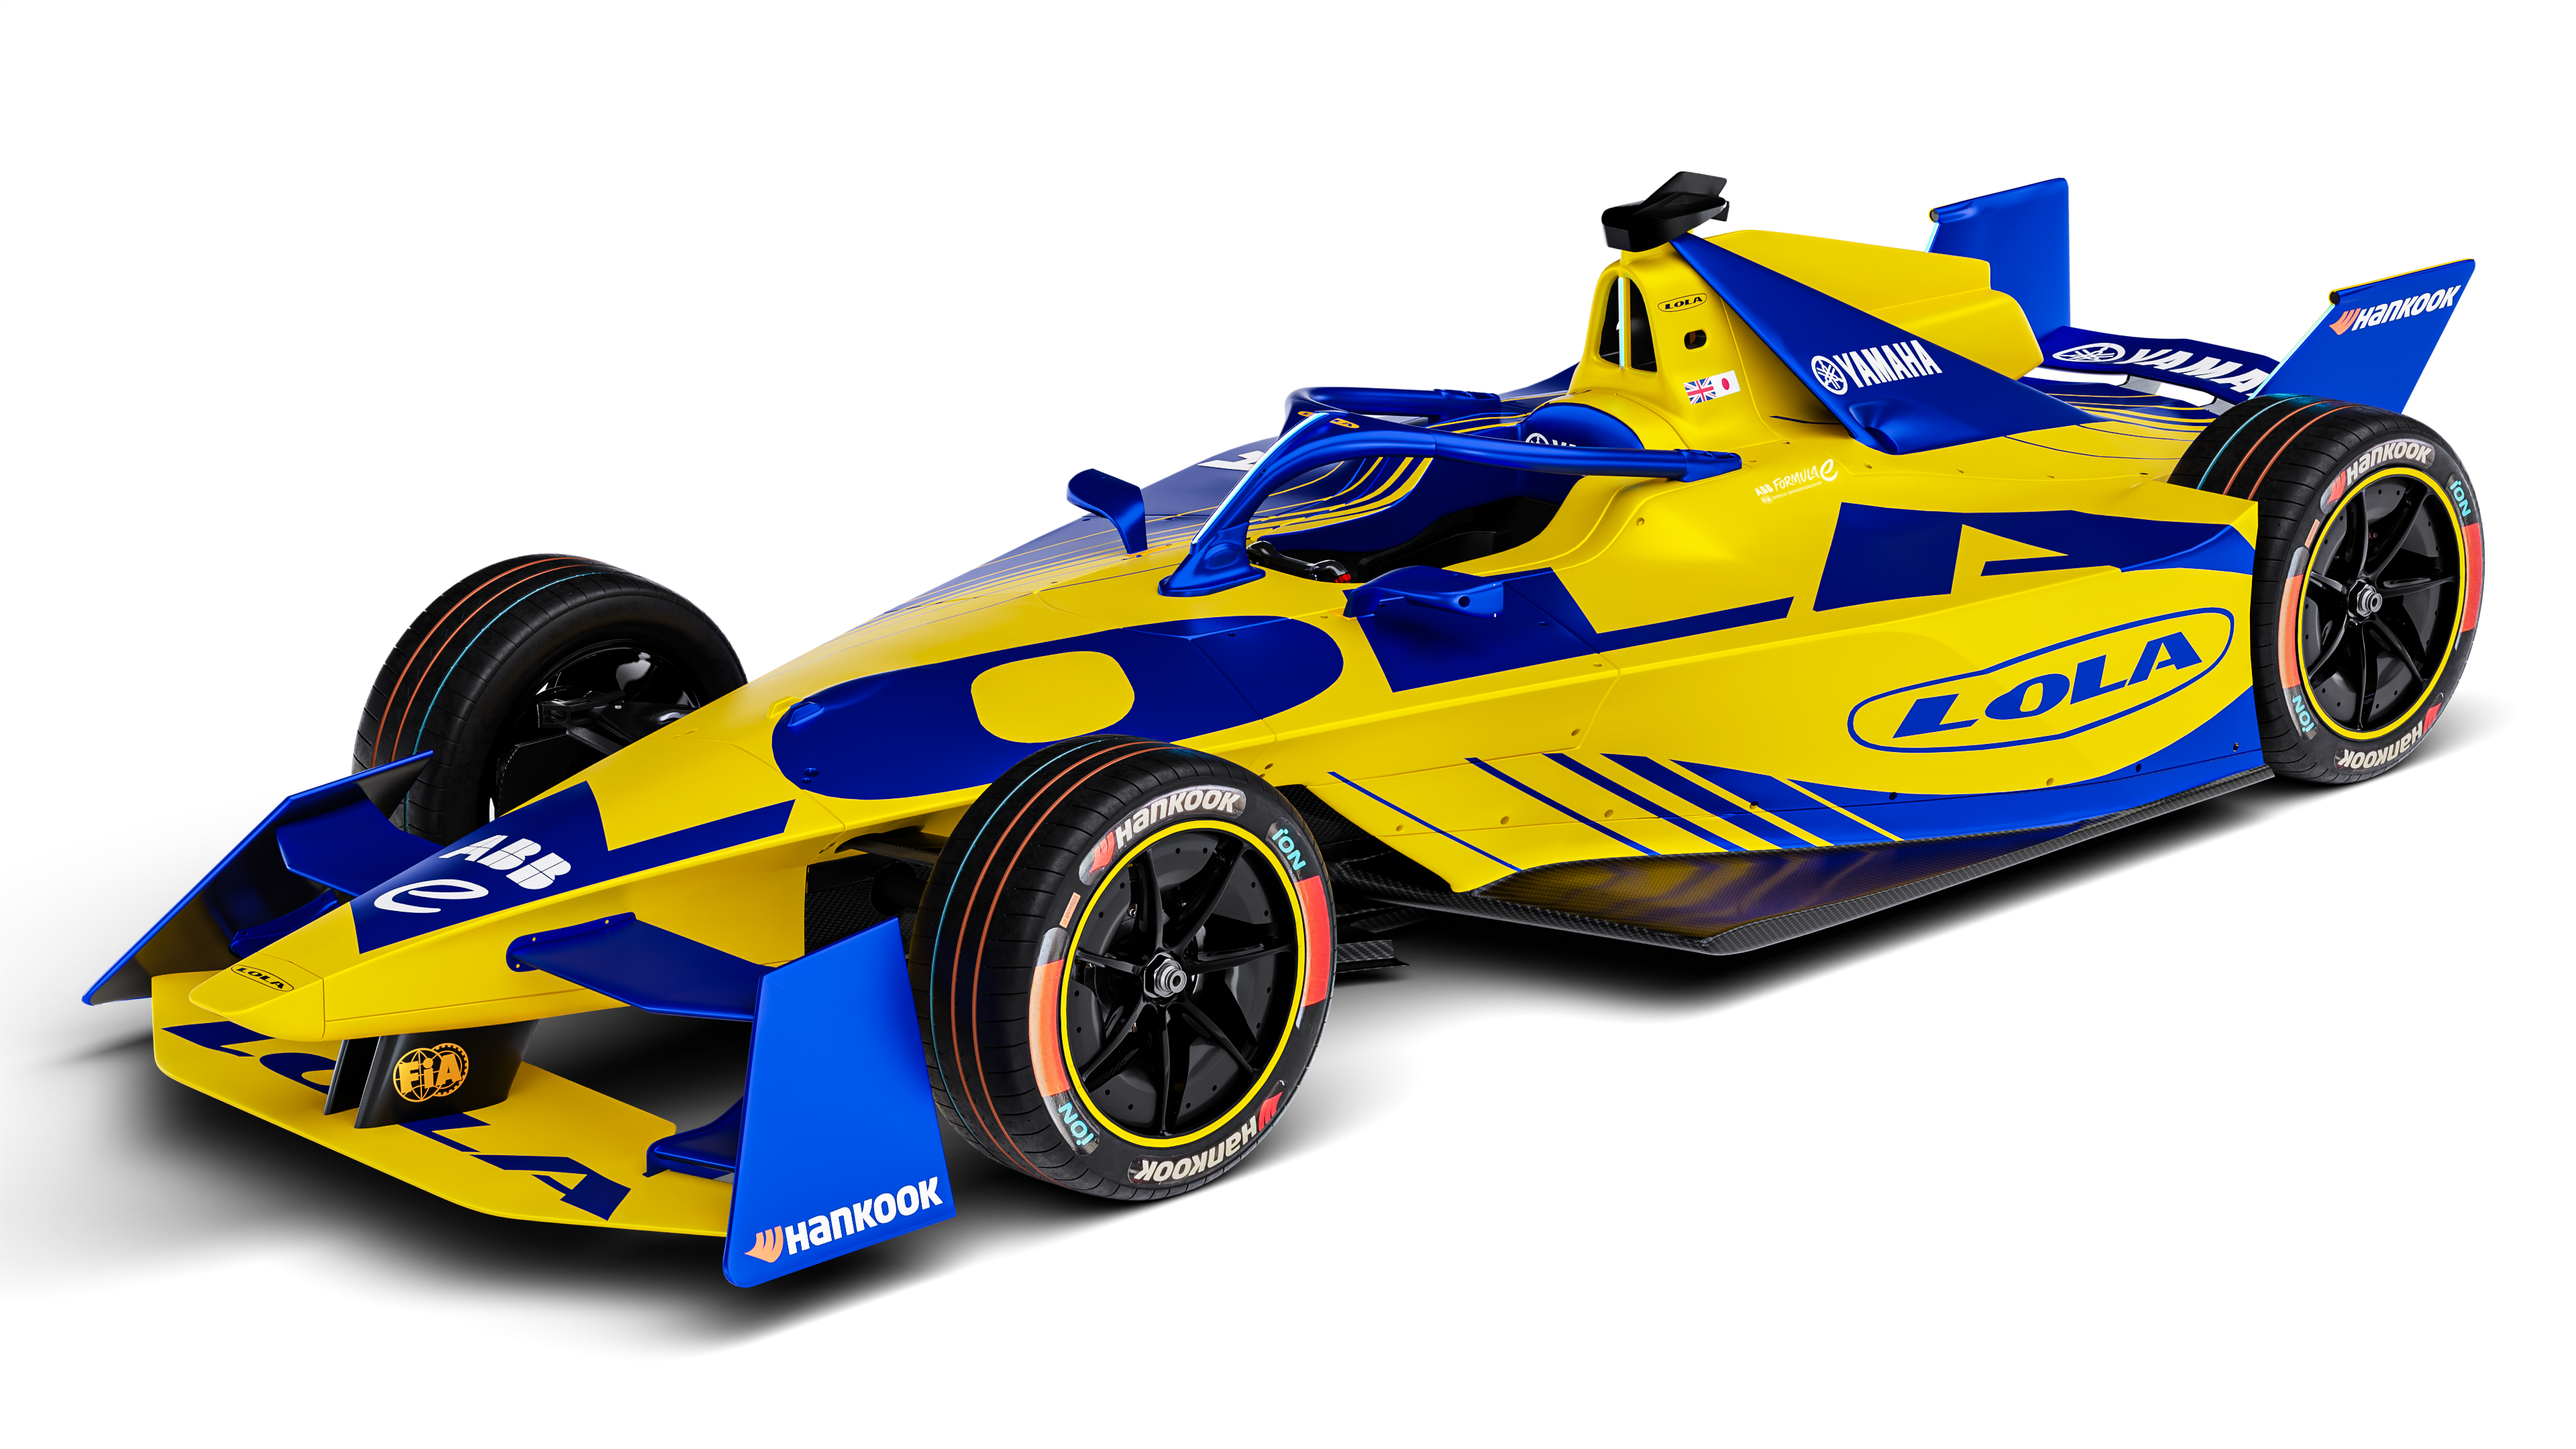 Lola Cars solidifies commitment to ABB FIA Formula E World Championship with Yamaha as official technical partner